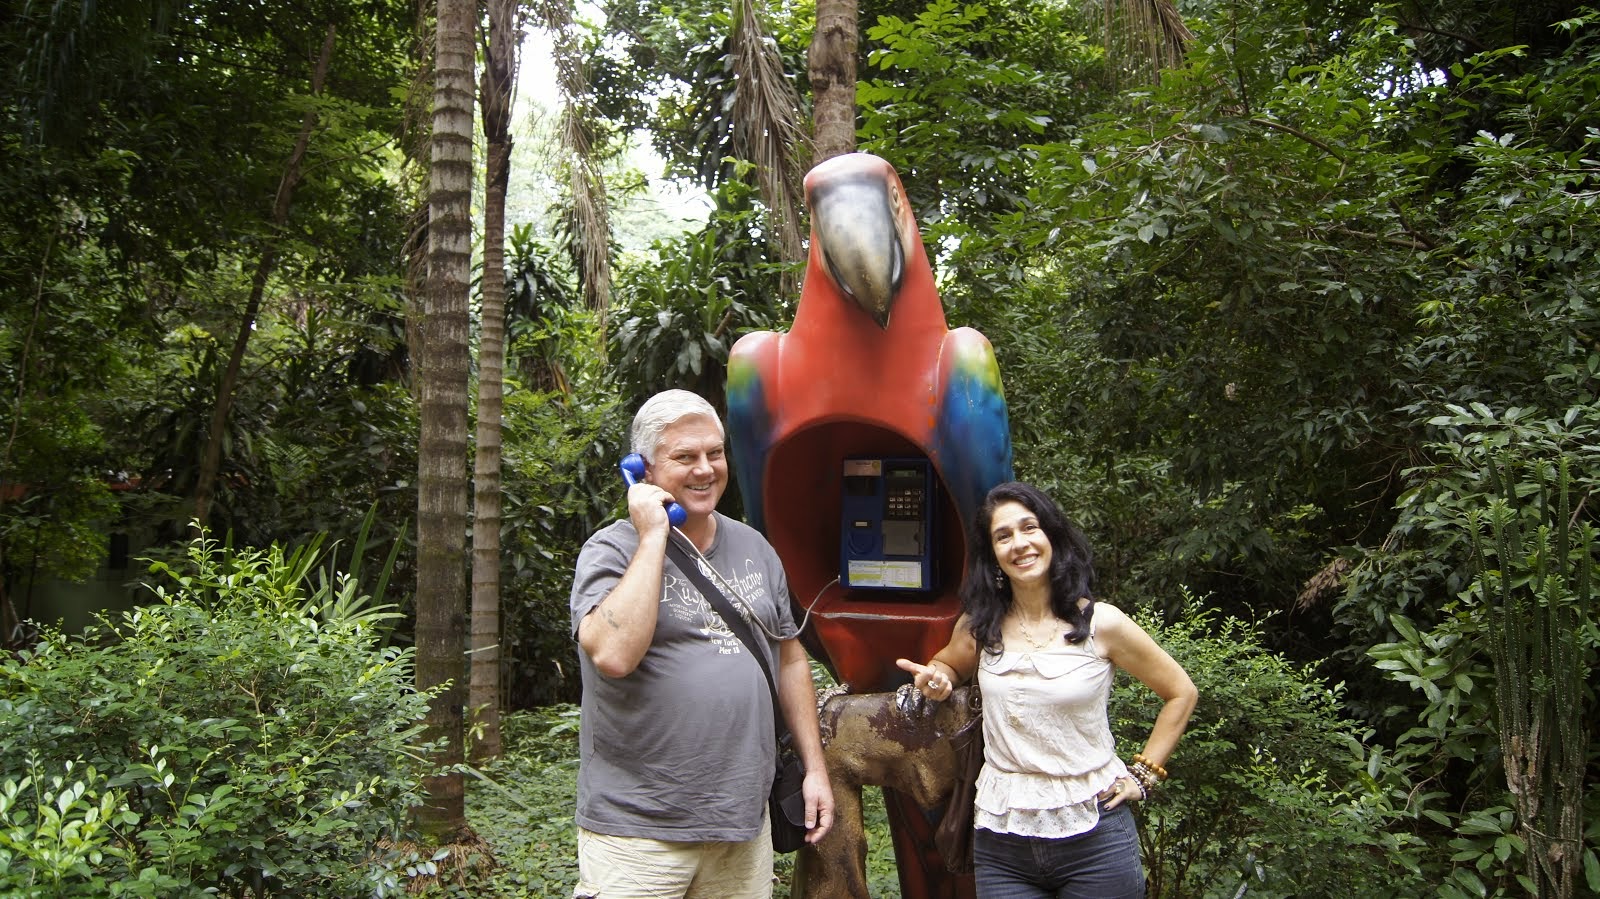 Parrot phone booth at the Zoo